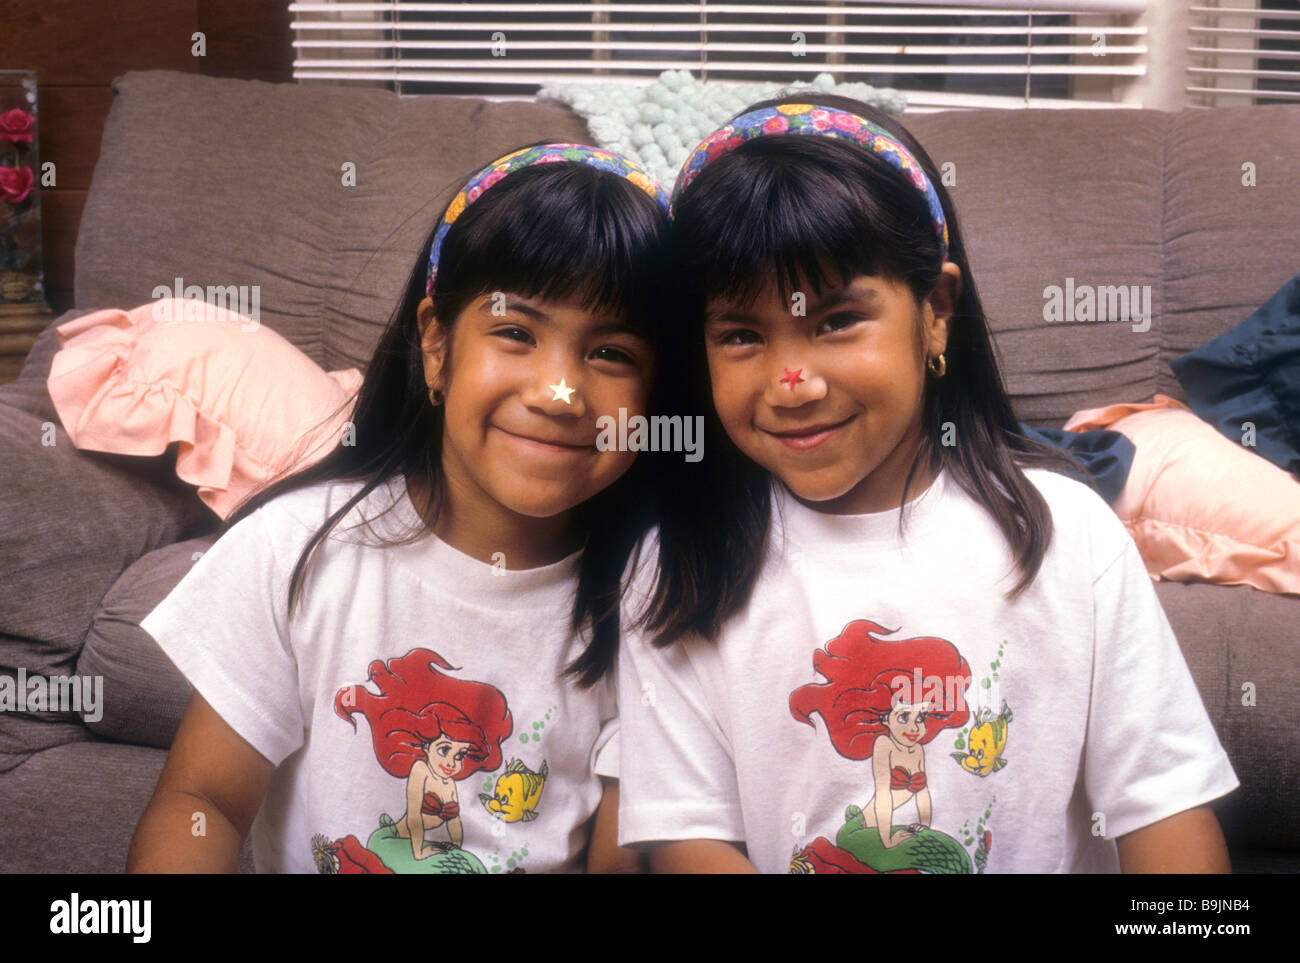 Twin latina girls hug touch smile love sister Hispanic portrait happy enjoy share together sibling face Stock Photo